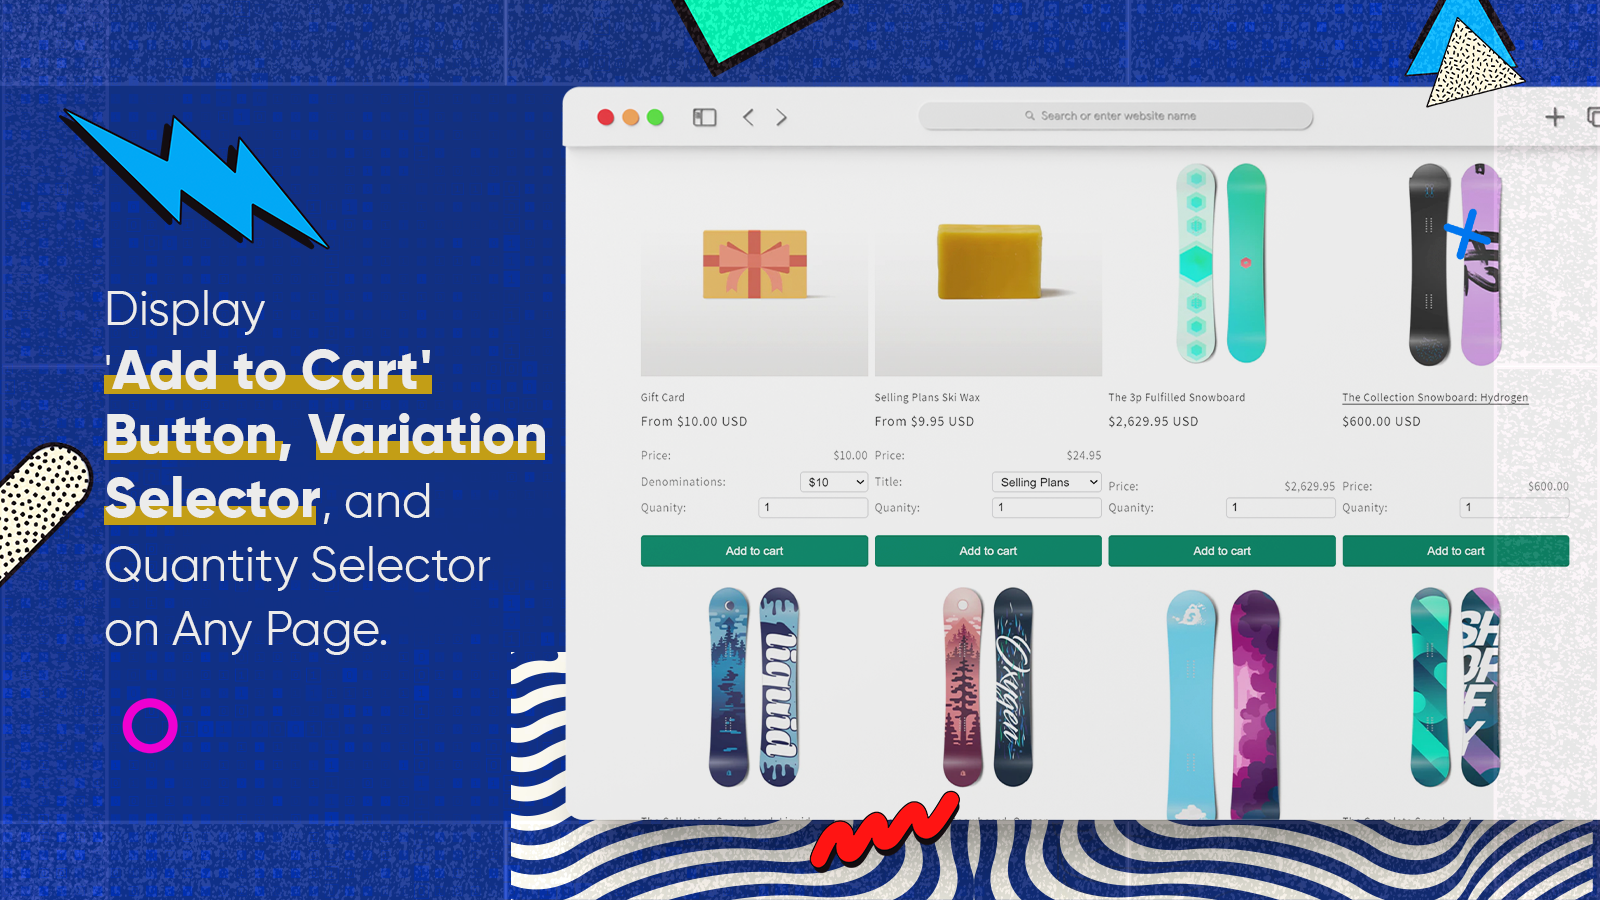 Display 'Add to Cart' Button, Variation Selector, and Quantity